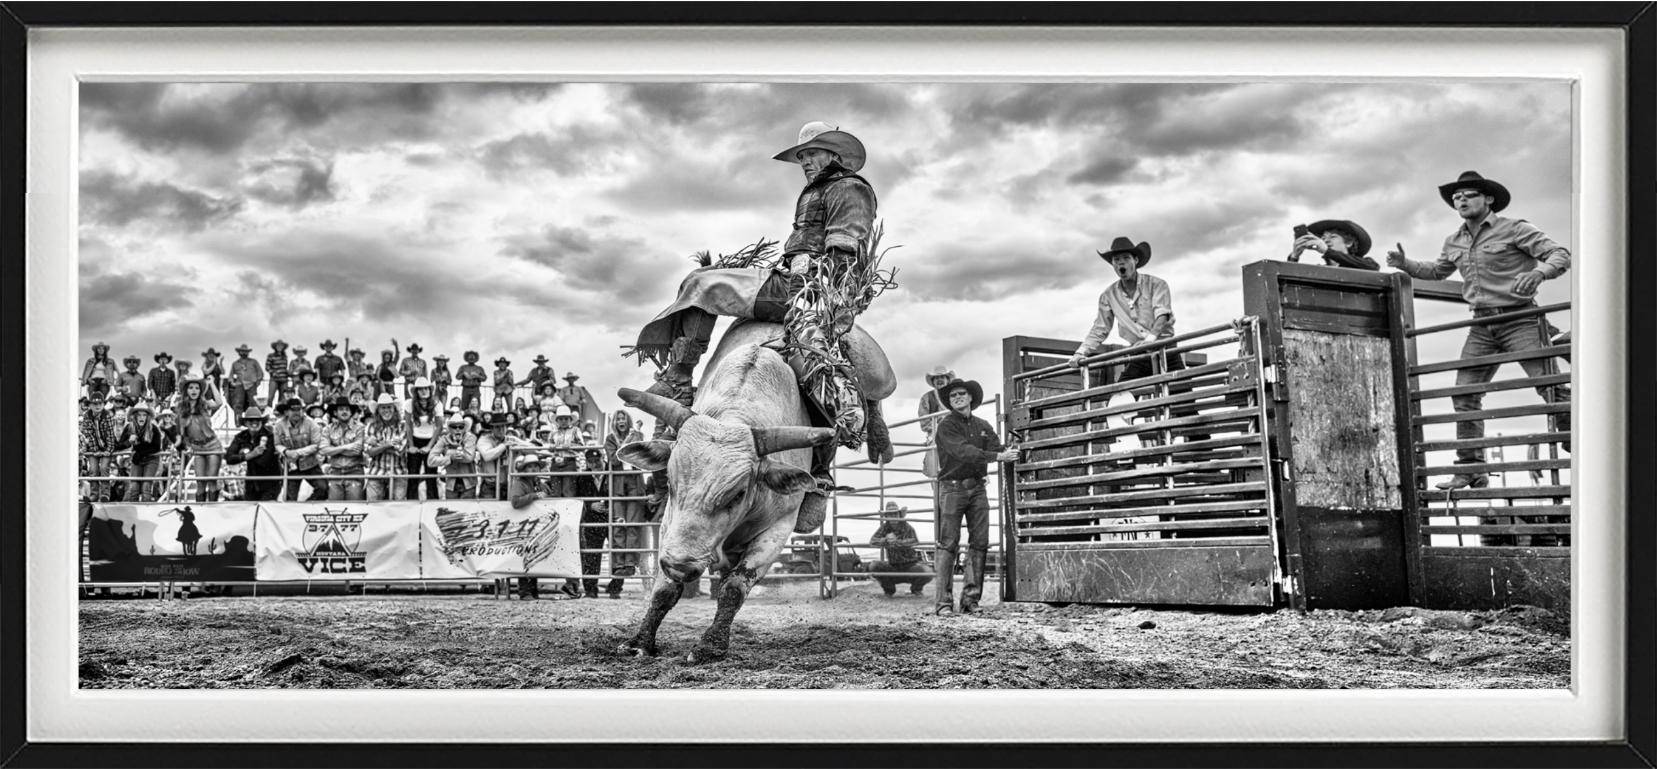 'Rodeo' - Cowboy on a Bull, fine art photography, 2023 - Photograph by David Yarrow